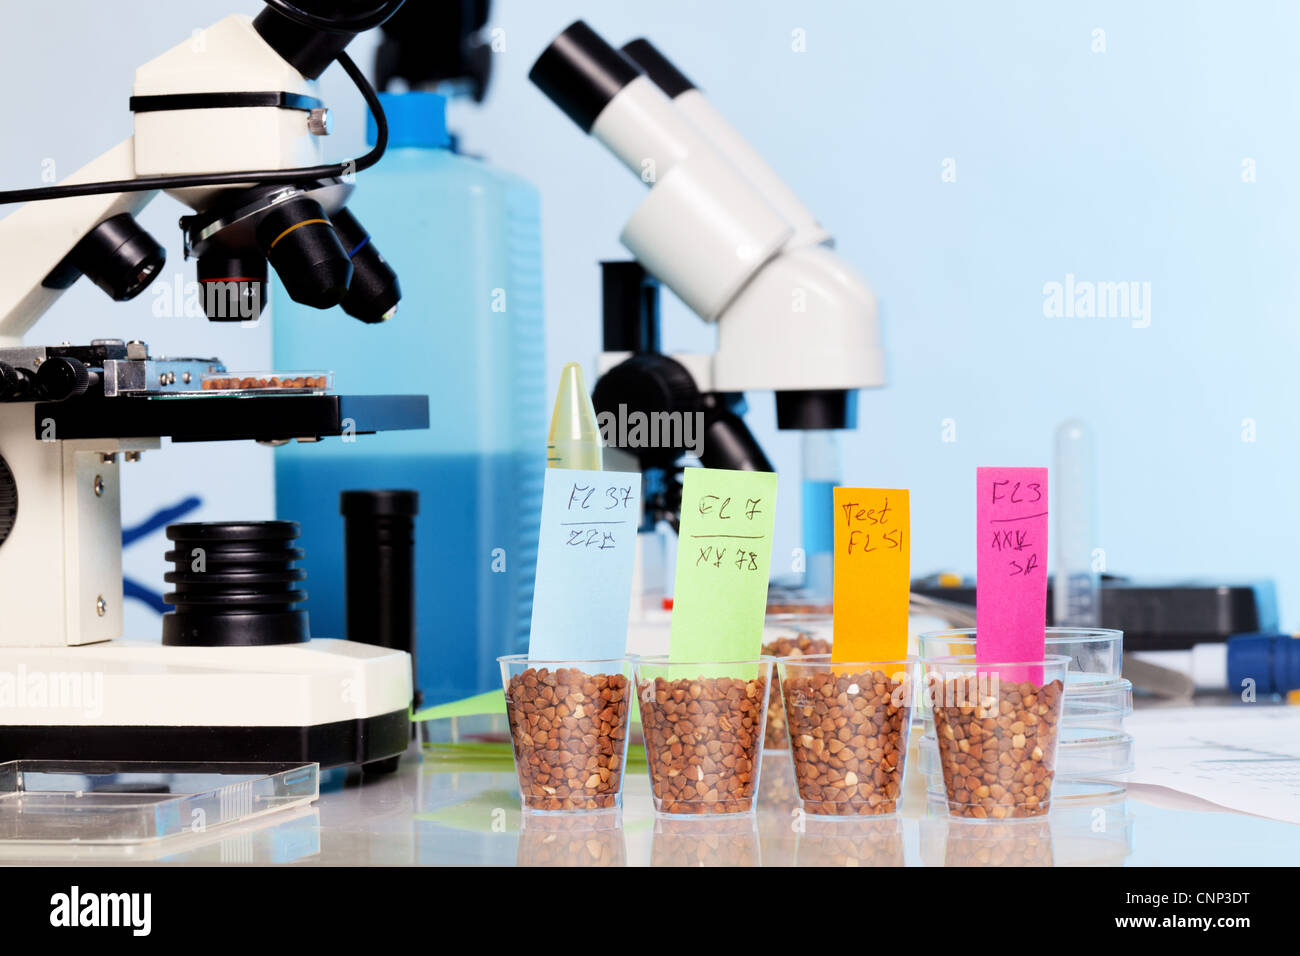 Testing of GMO wheat varieties, check on food safety Stock Photo